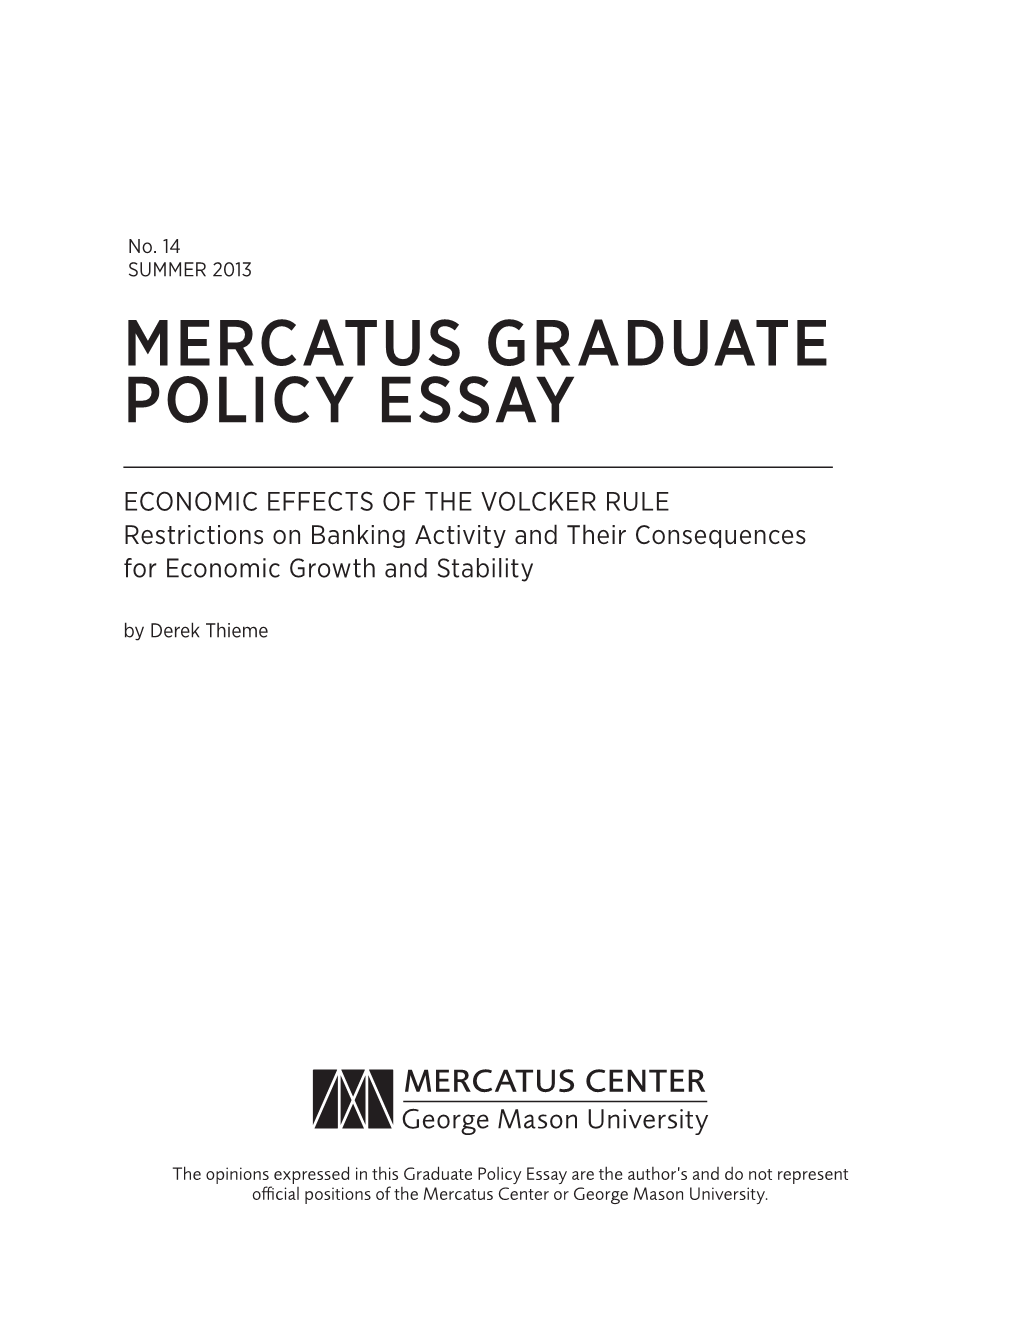 VOLCKER RULE Restrictions on Banking Activity and Their Consequences for Economic Growth and Stability by Derek Thieme